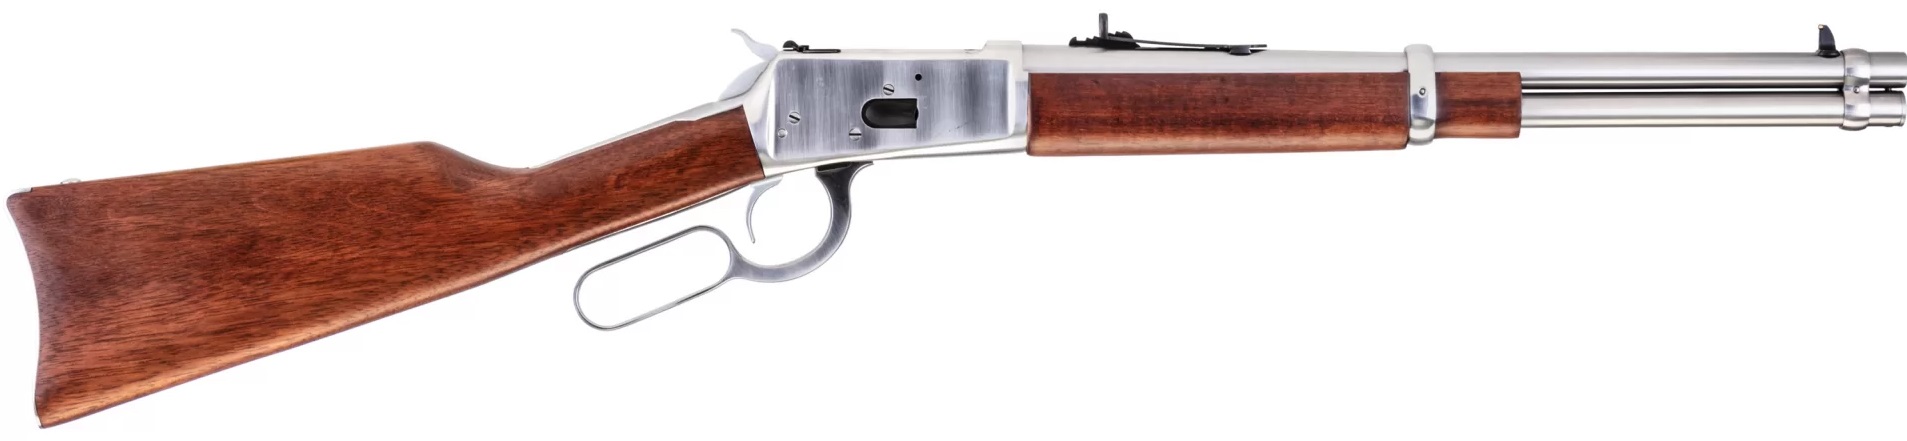 The Rossi 16.5 Stainless 45 Colt